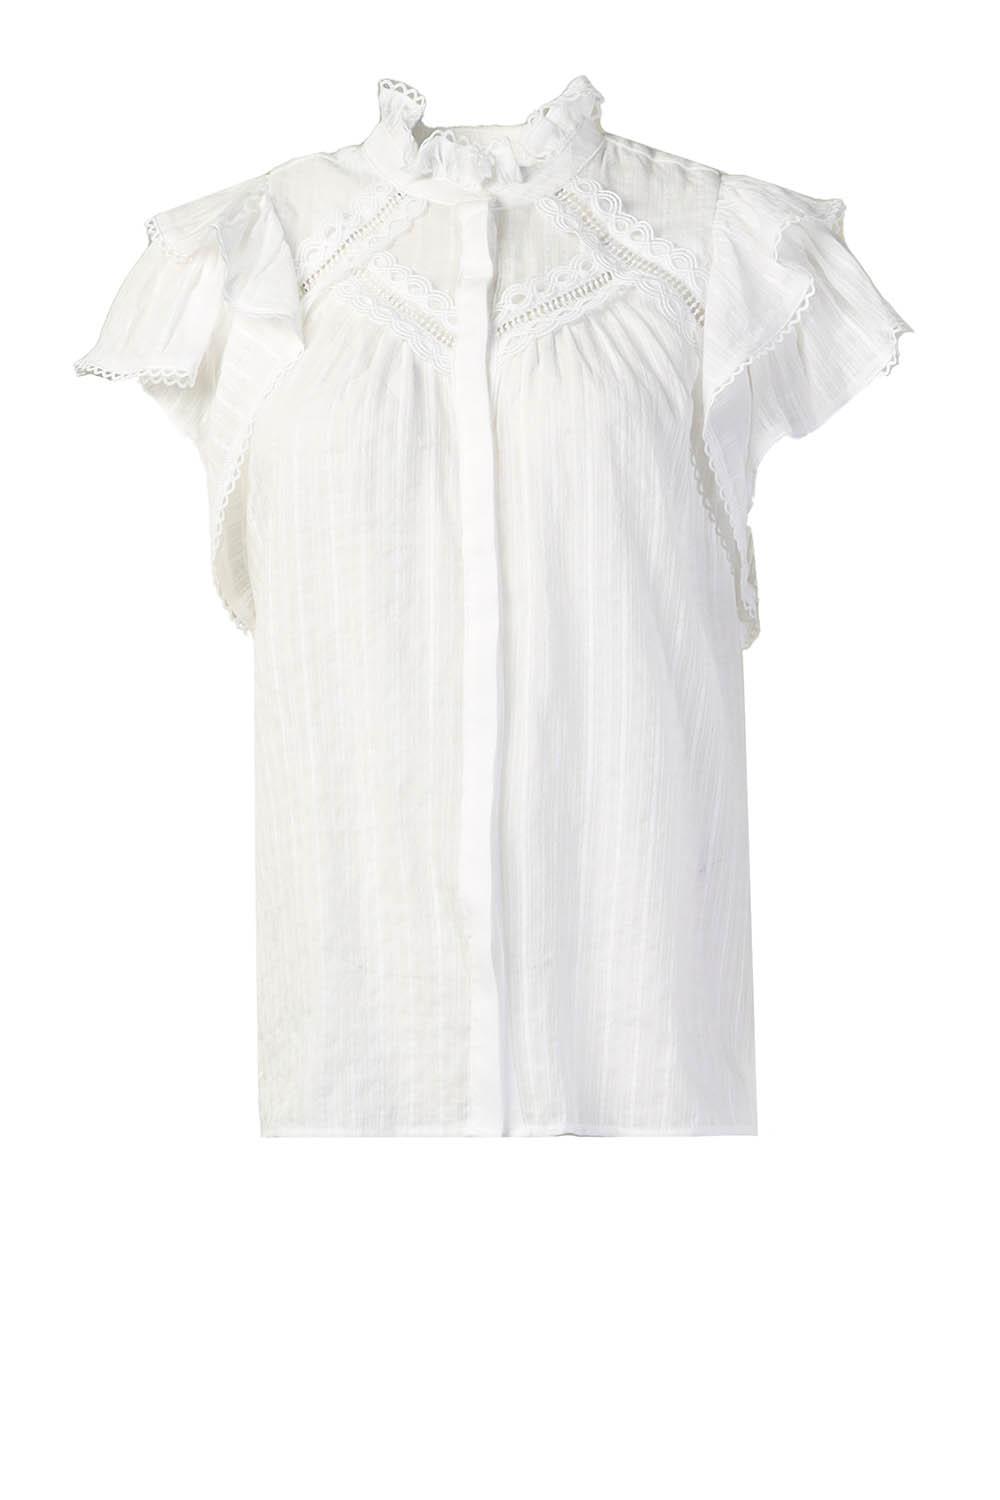 Suncoo Broderie blouse Lady naturel